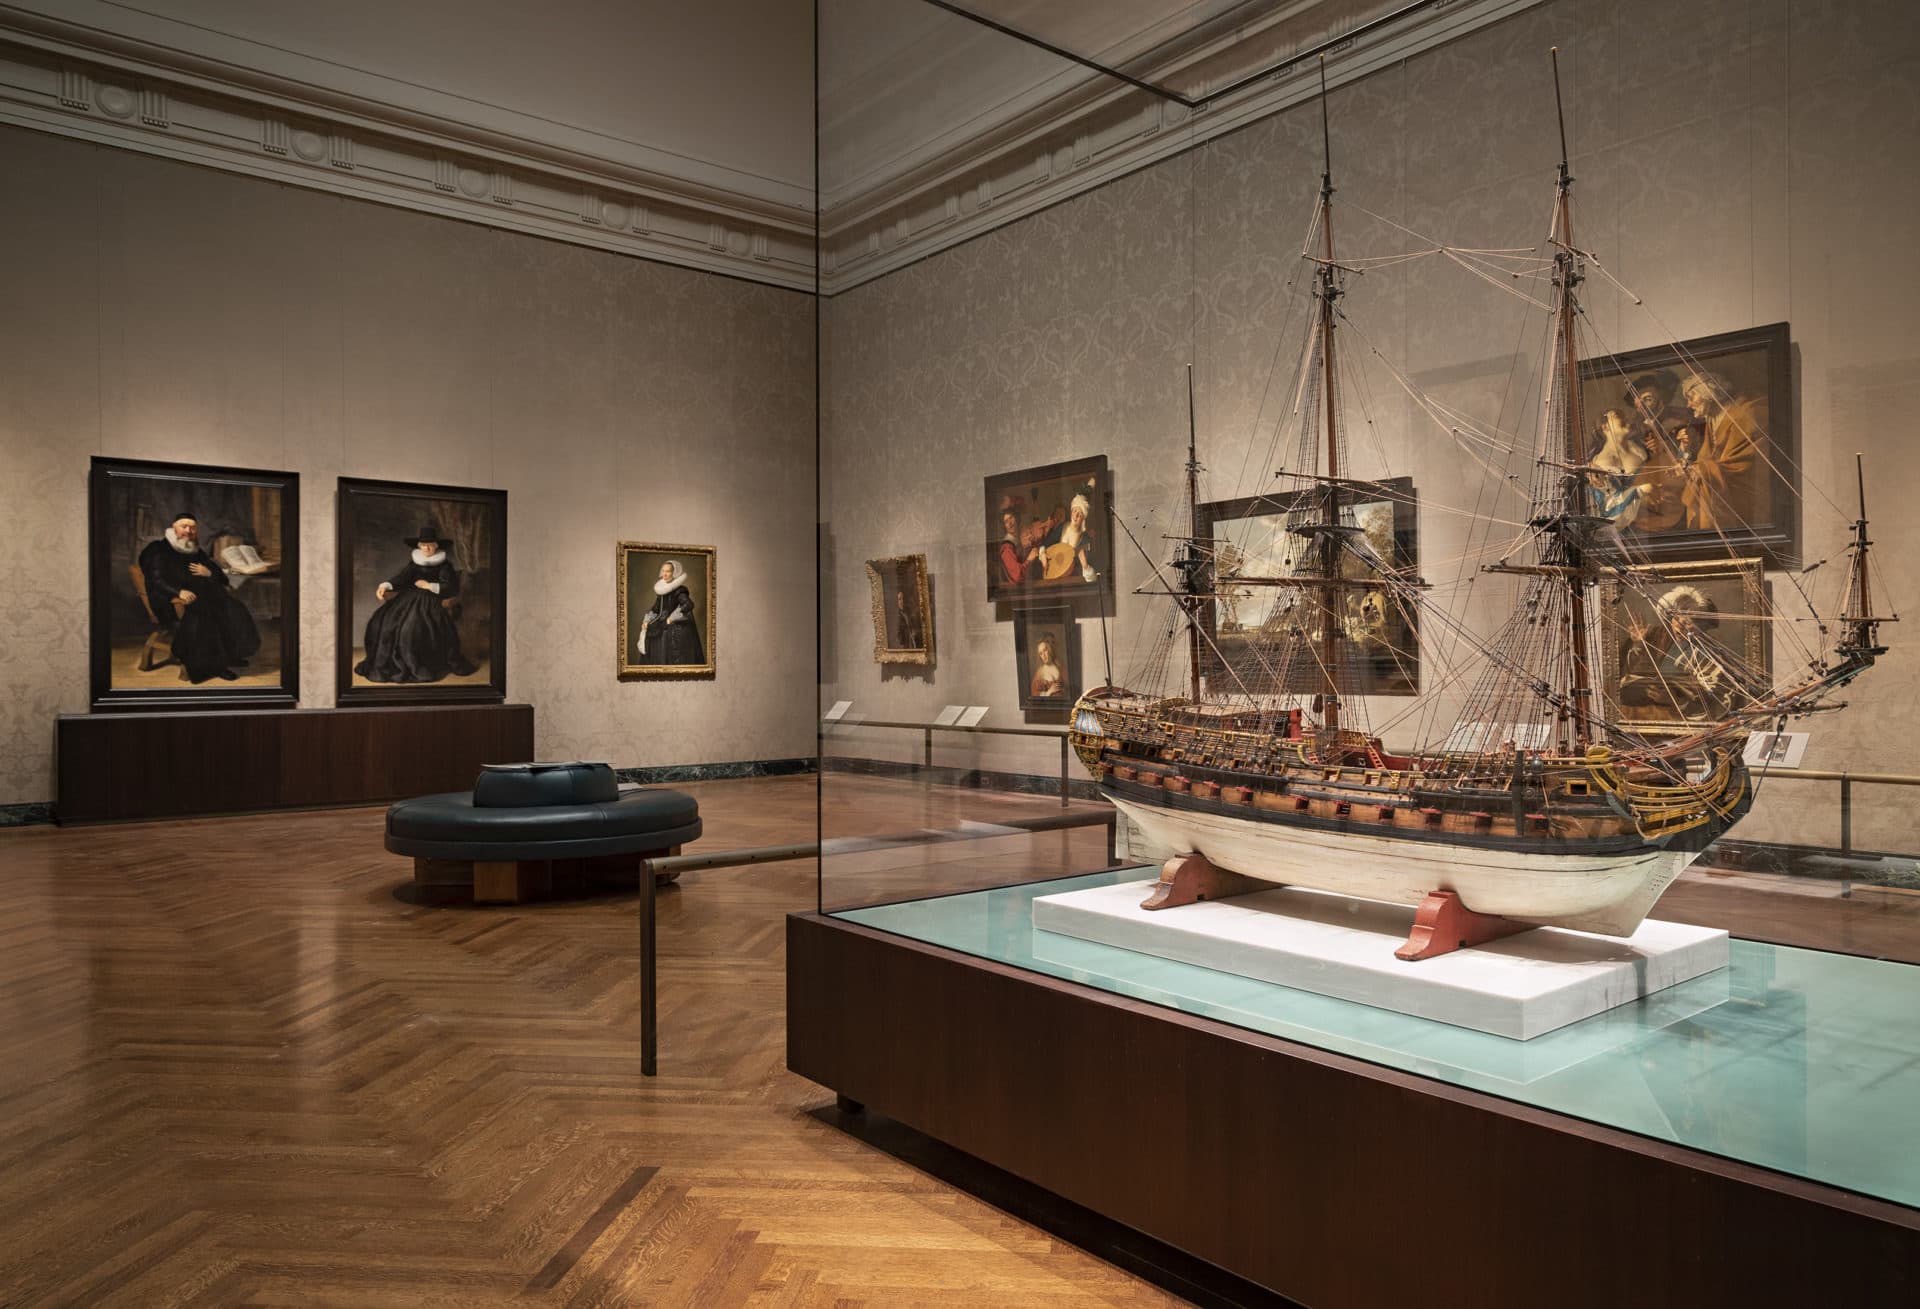 Art of the Netherlands in the 17th Century Gallery at the Museum of Fine Arts, Boston. (Courtesy Museum of Fine Arts, Boston)